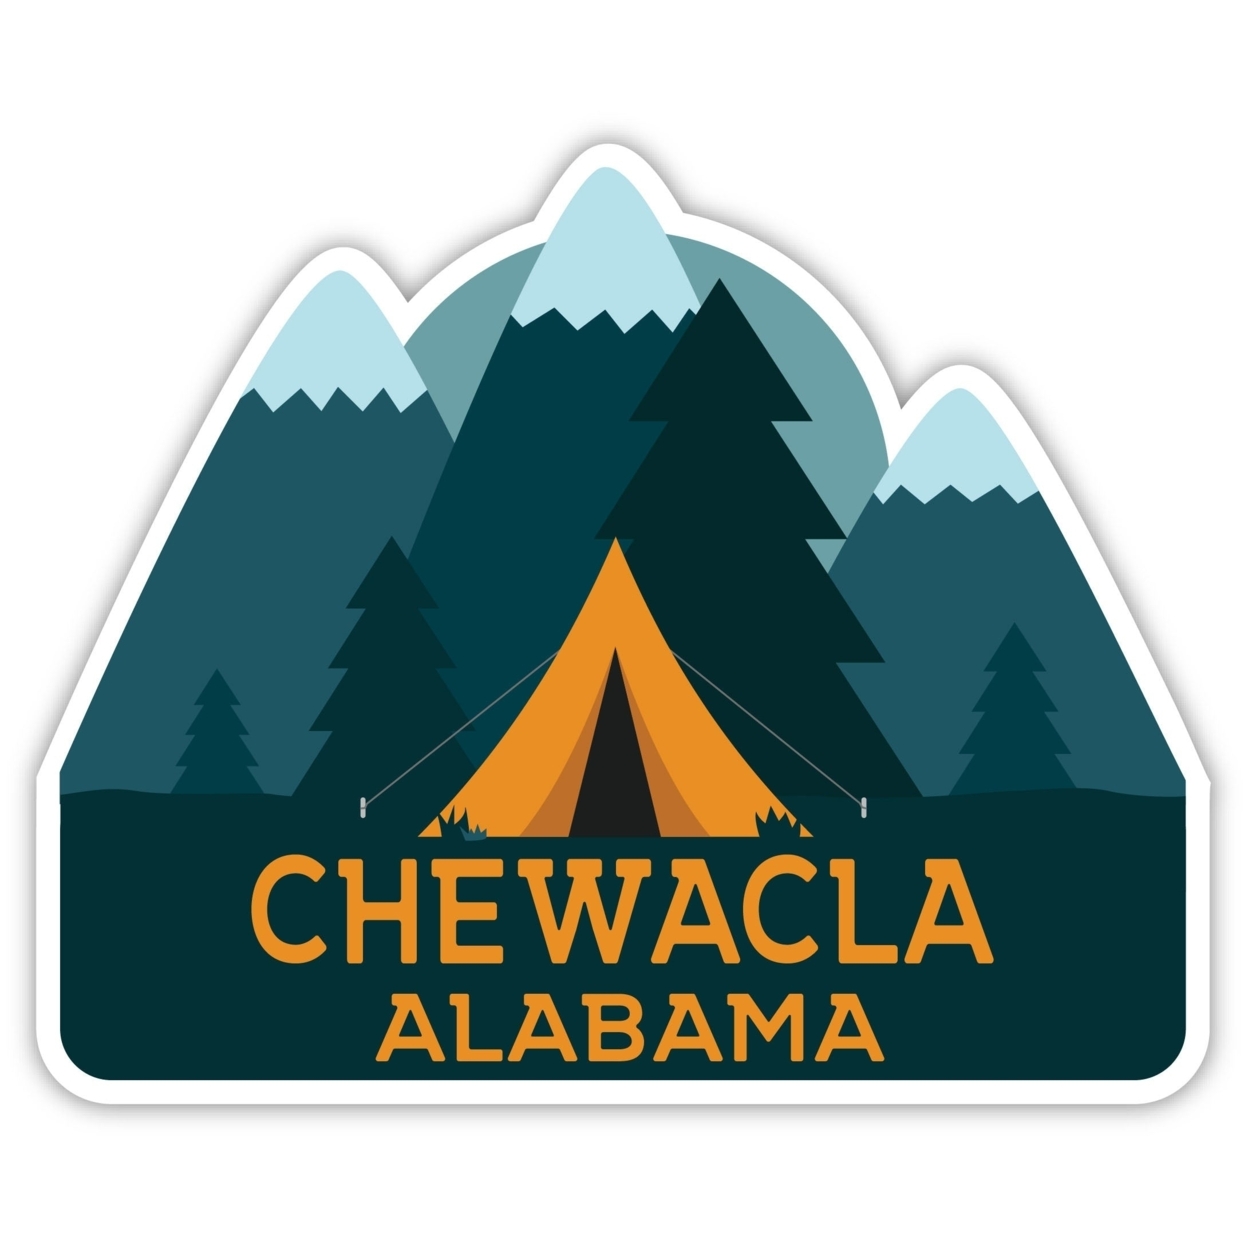 Chewacla Alabama Souvenir Decorative Stickers (Choose Theme And Size) - 4-Pack, 10-Inch, Tent